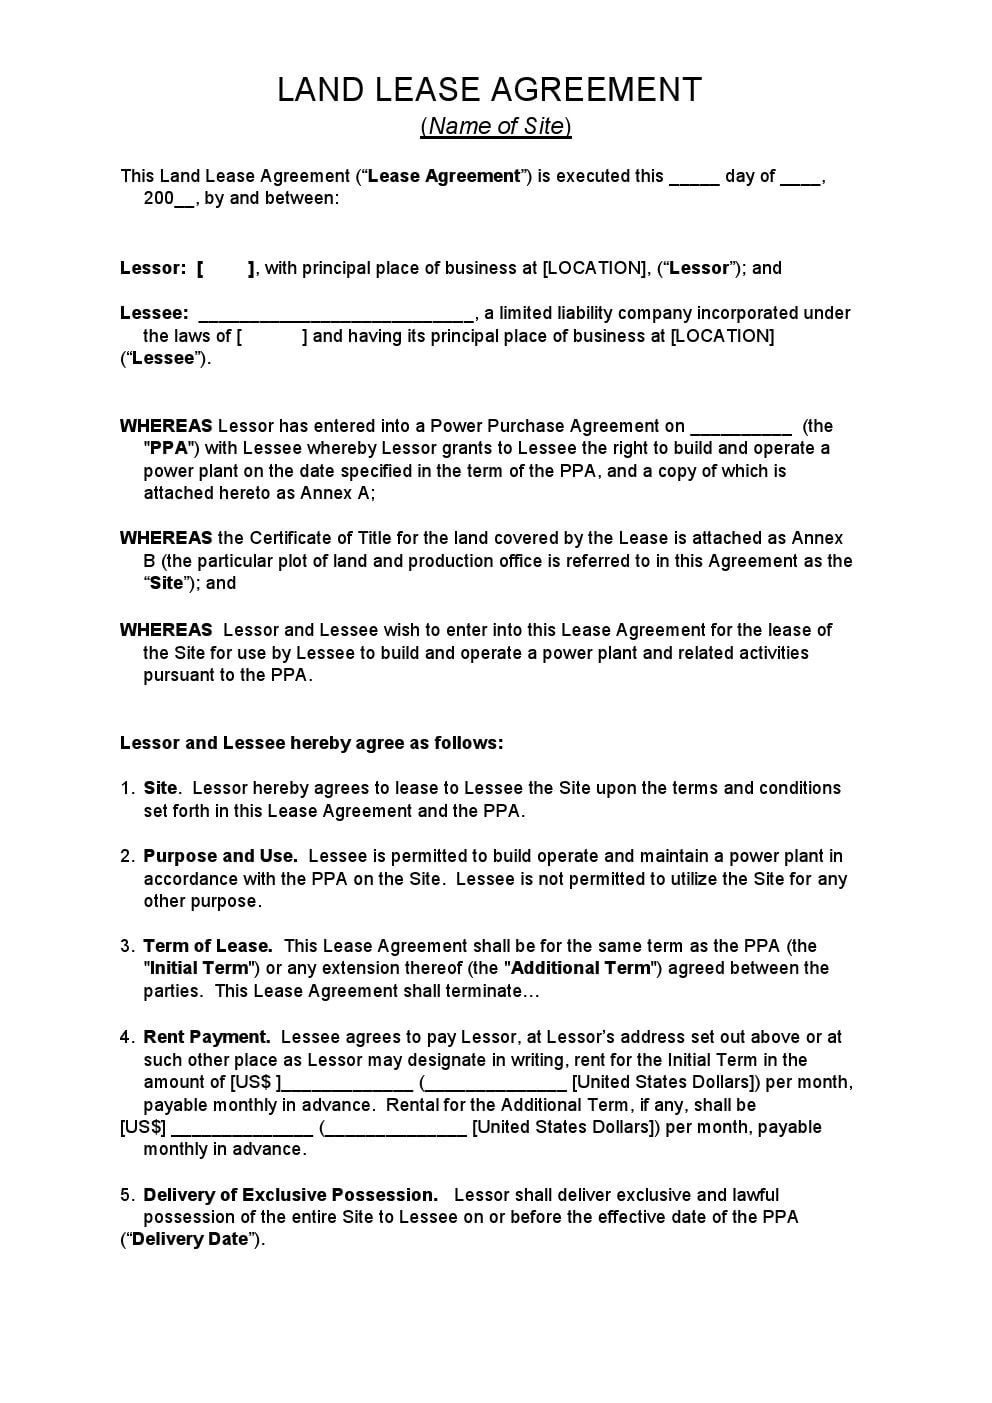 download-free-land-lease-agreement-printable-lease-agreement